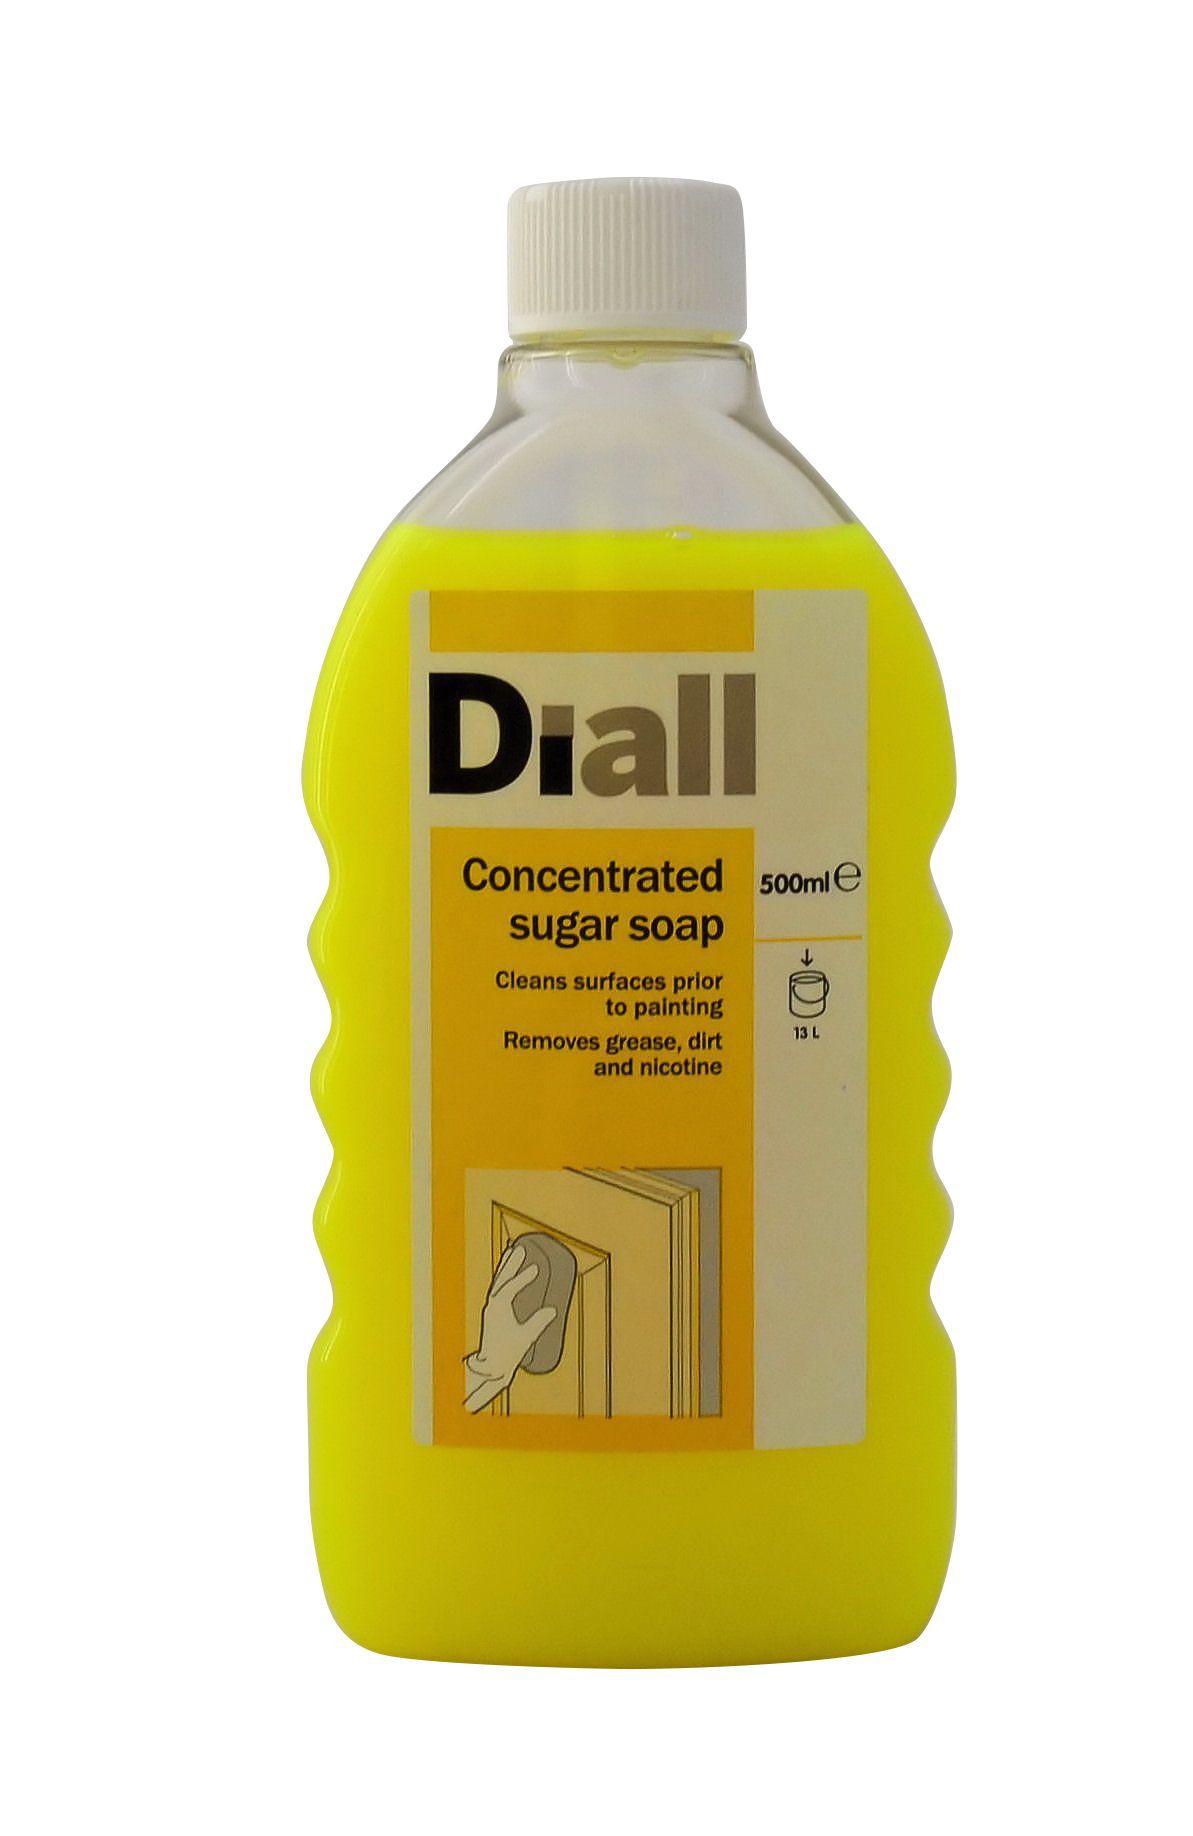 https://media.diy.com/is/image/Kingfisher/diall-concentrated-liquid-sugar-soap-0-5l~03599501_02c?$MOB_PREV$&$width=768&$height=768